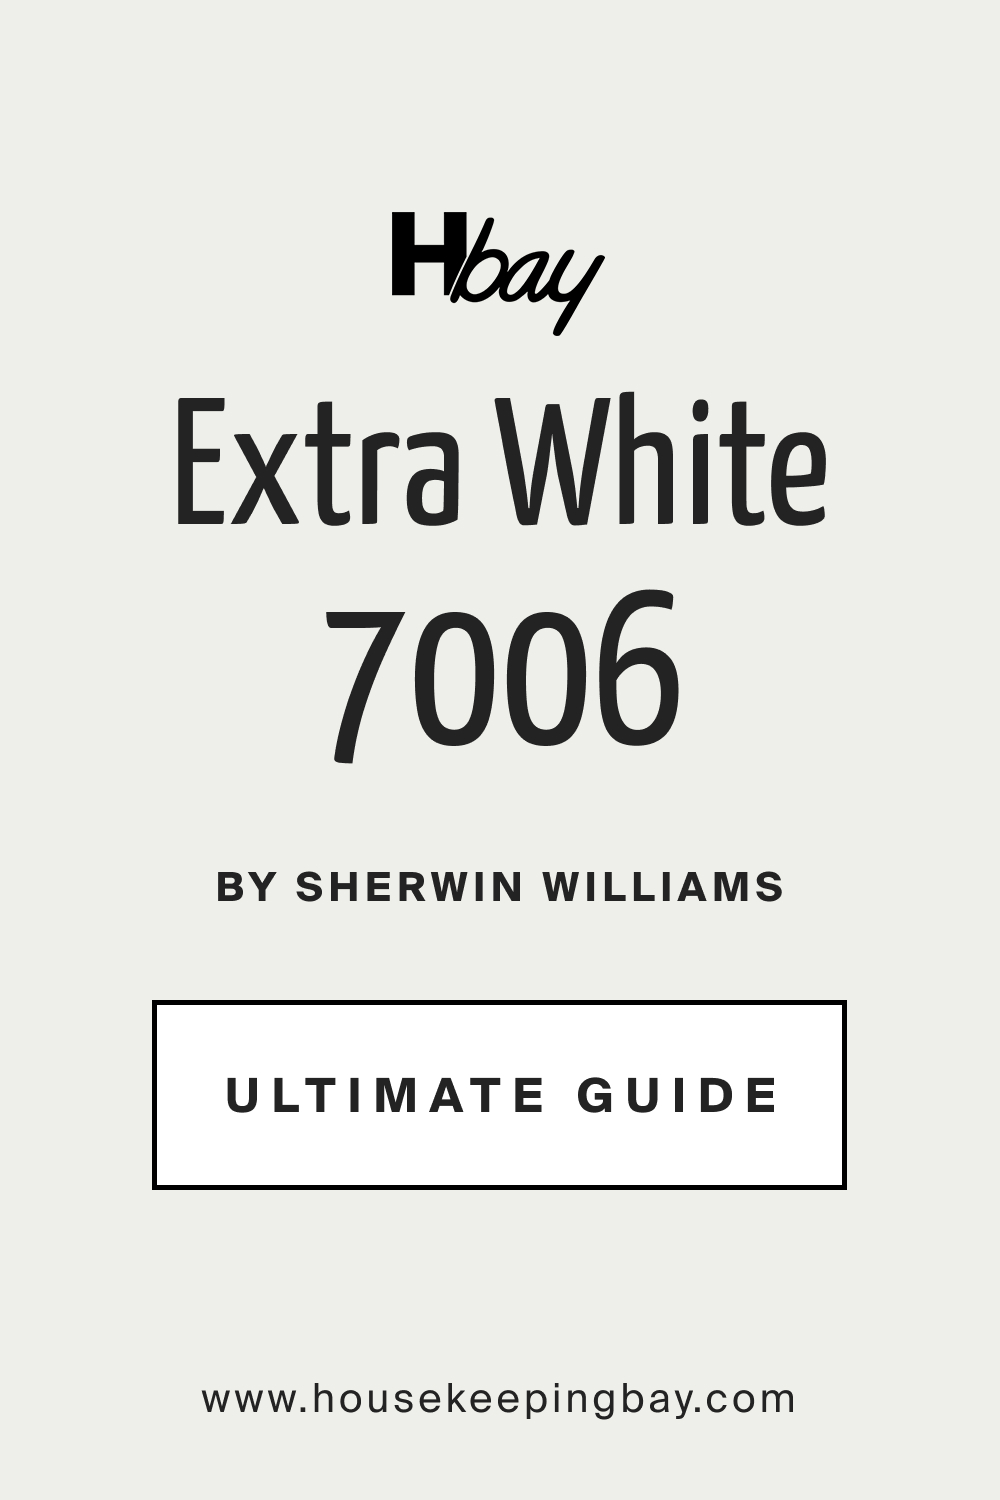 Extra White SW 7006 Paint Color by Sherwin Williams. Ultimate Guide